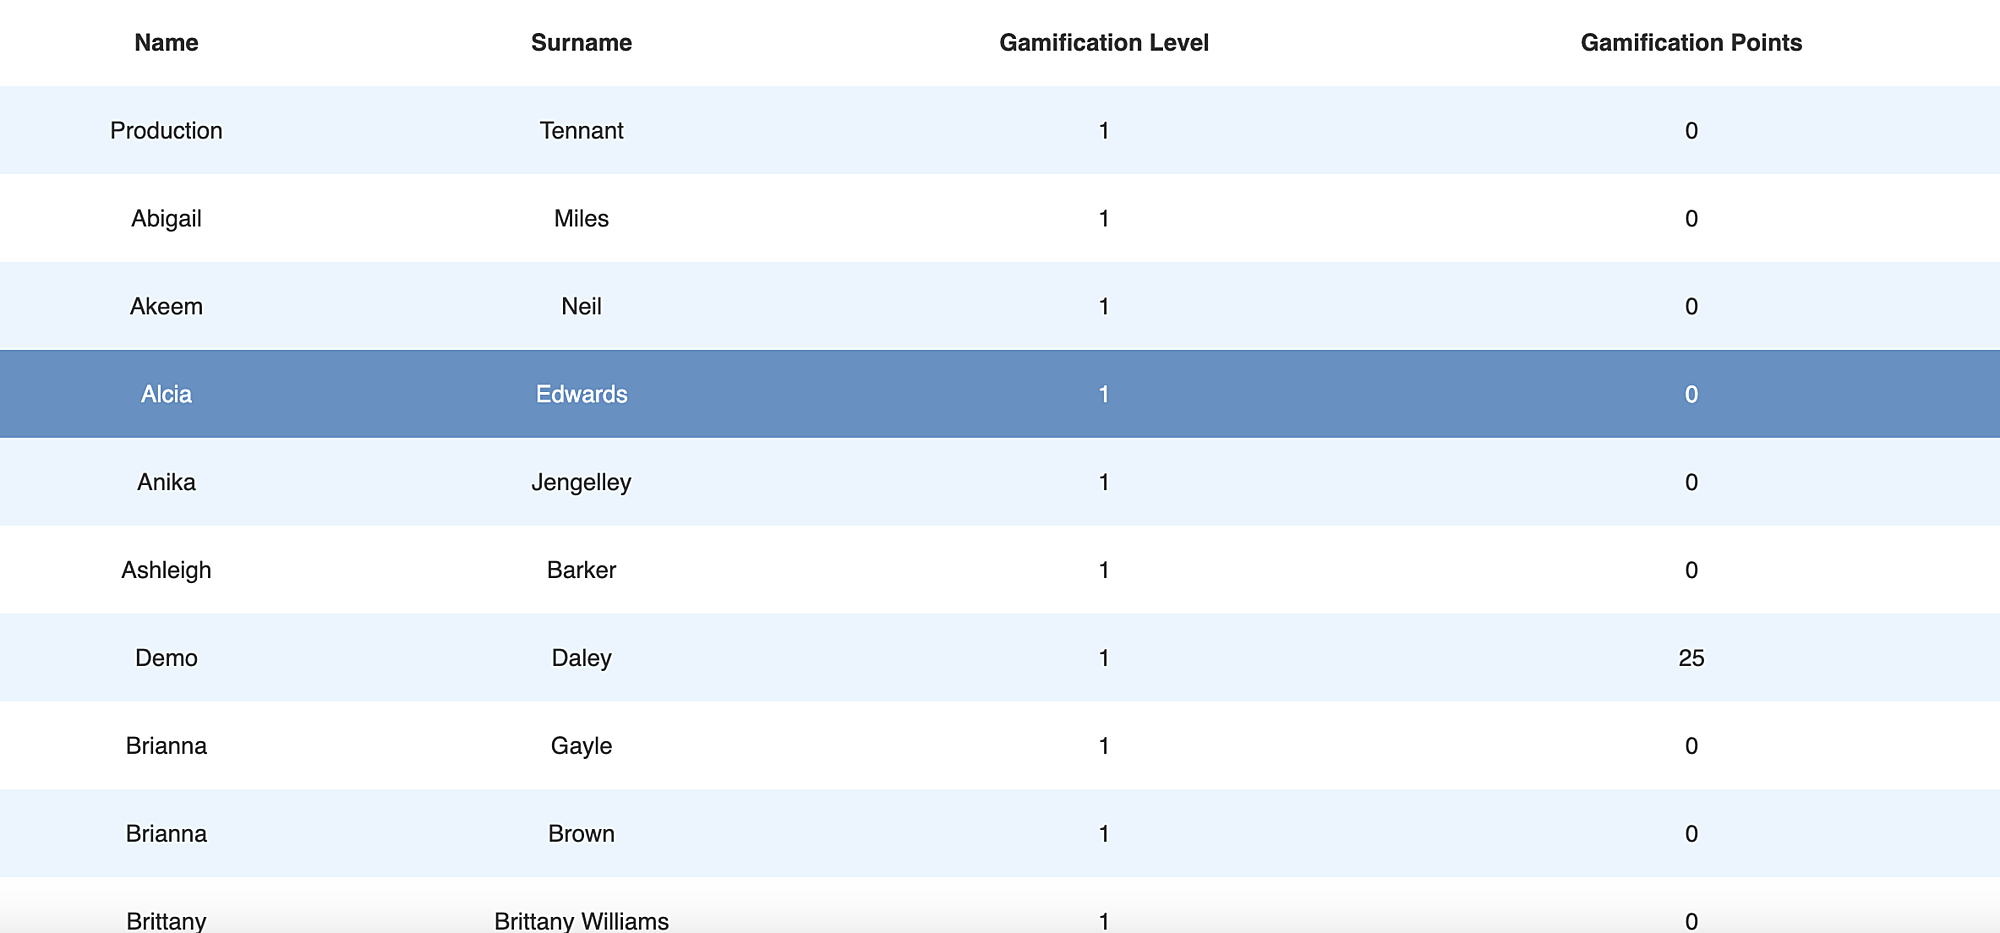 LMS gamification report example